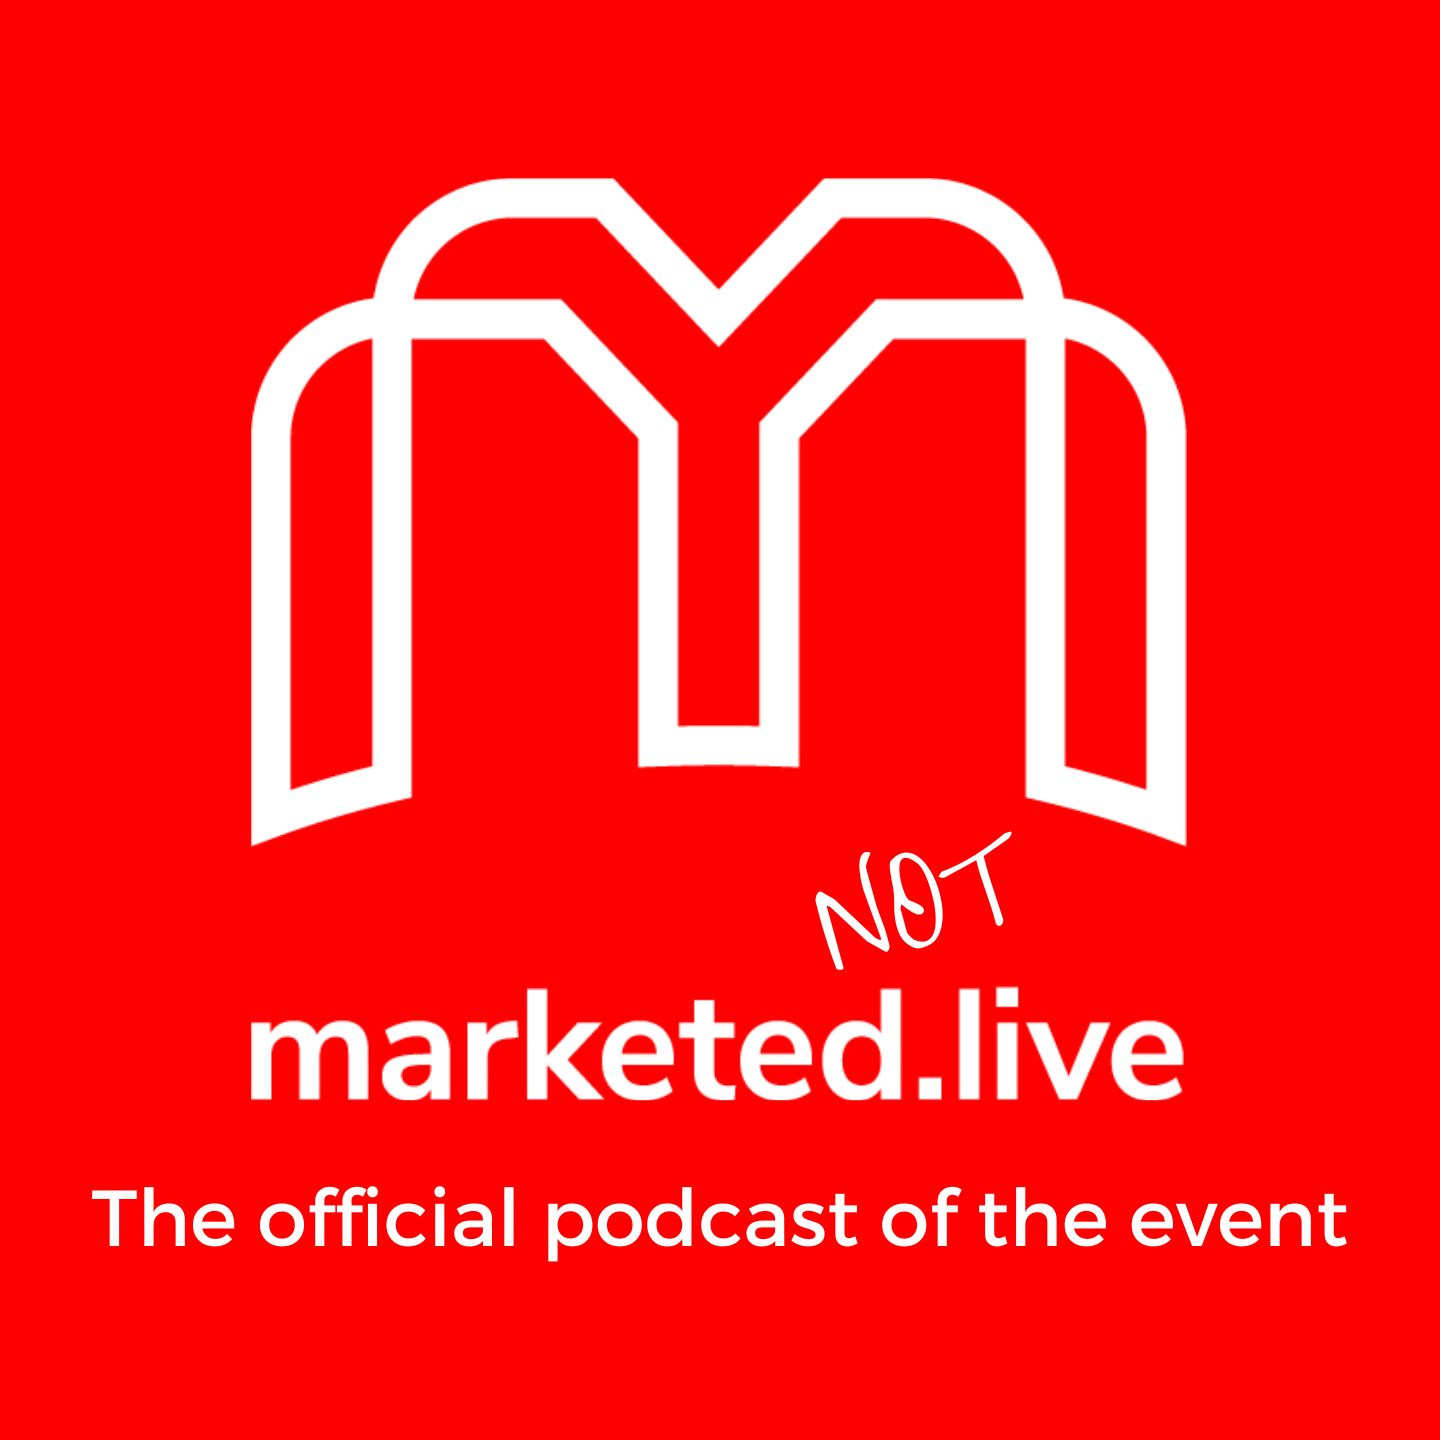 MarketEd NOT Live